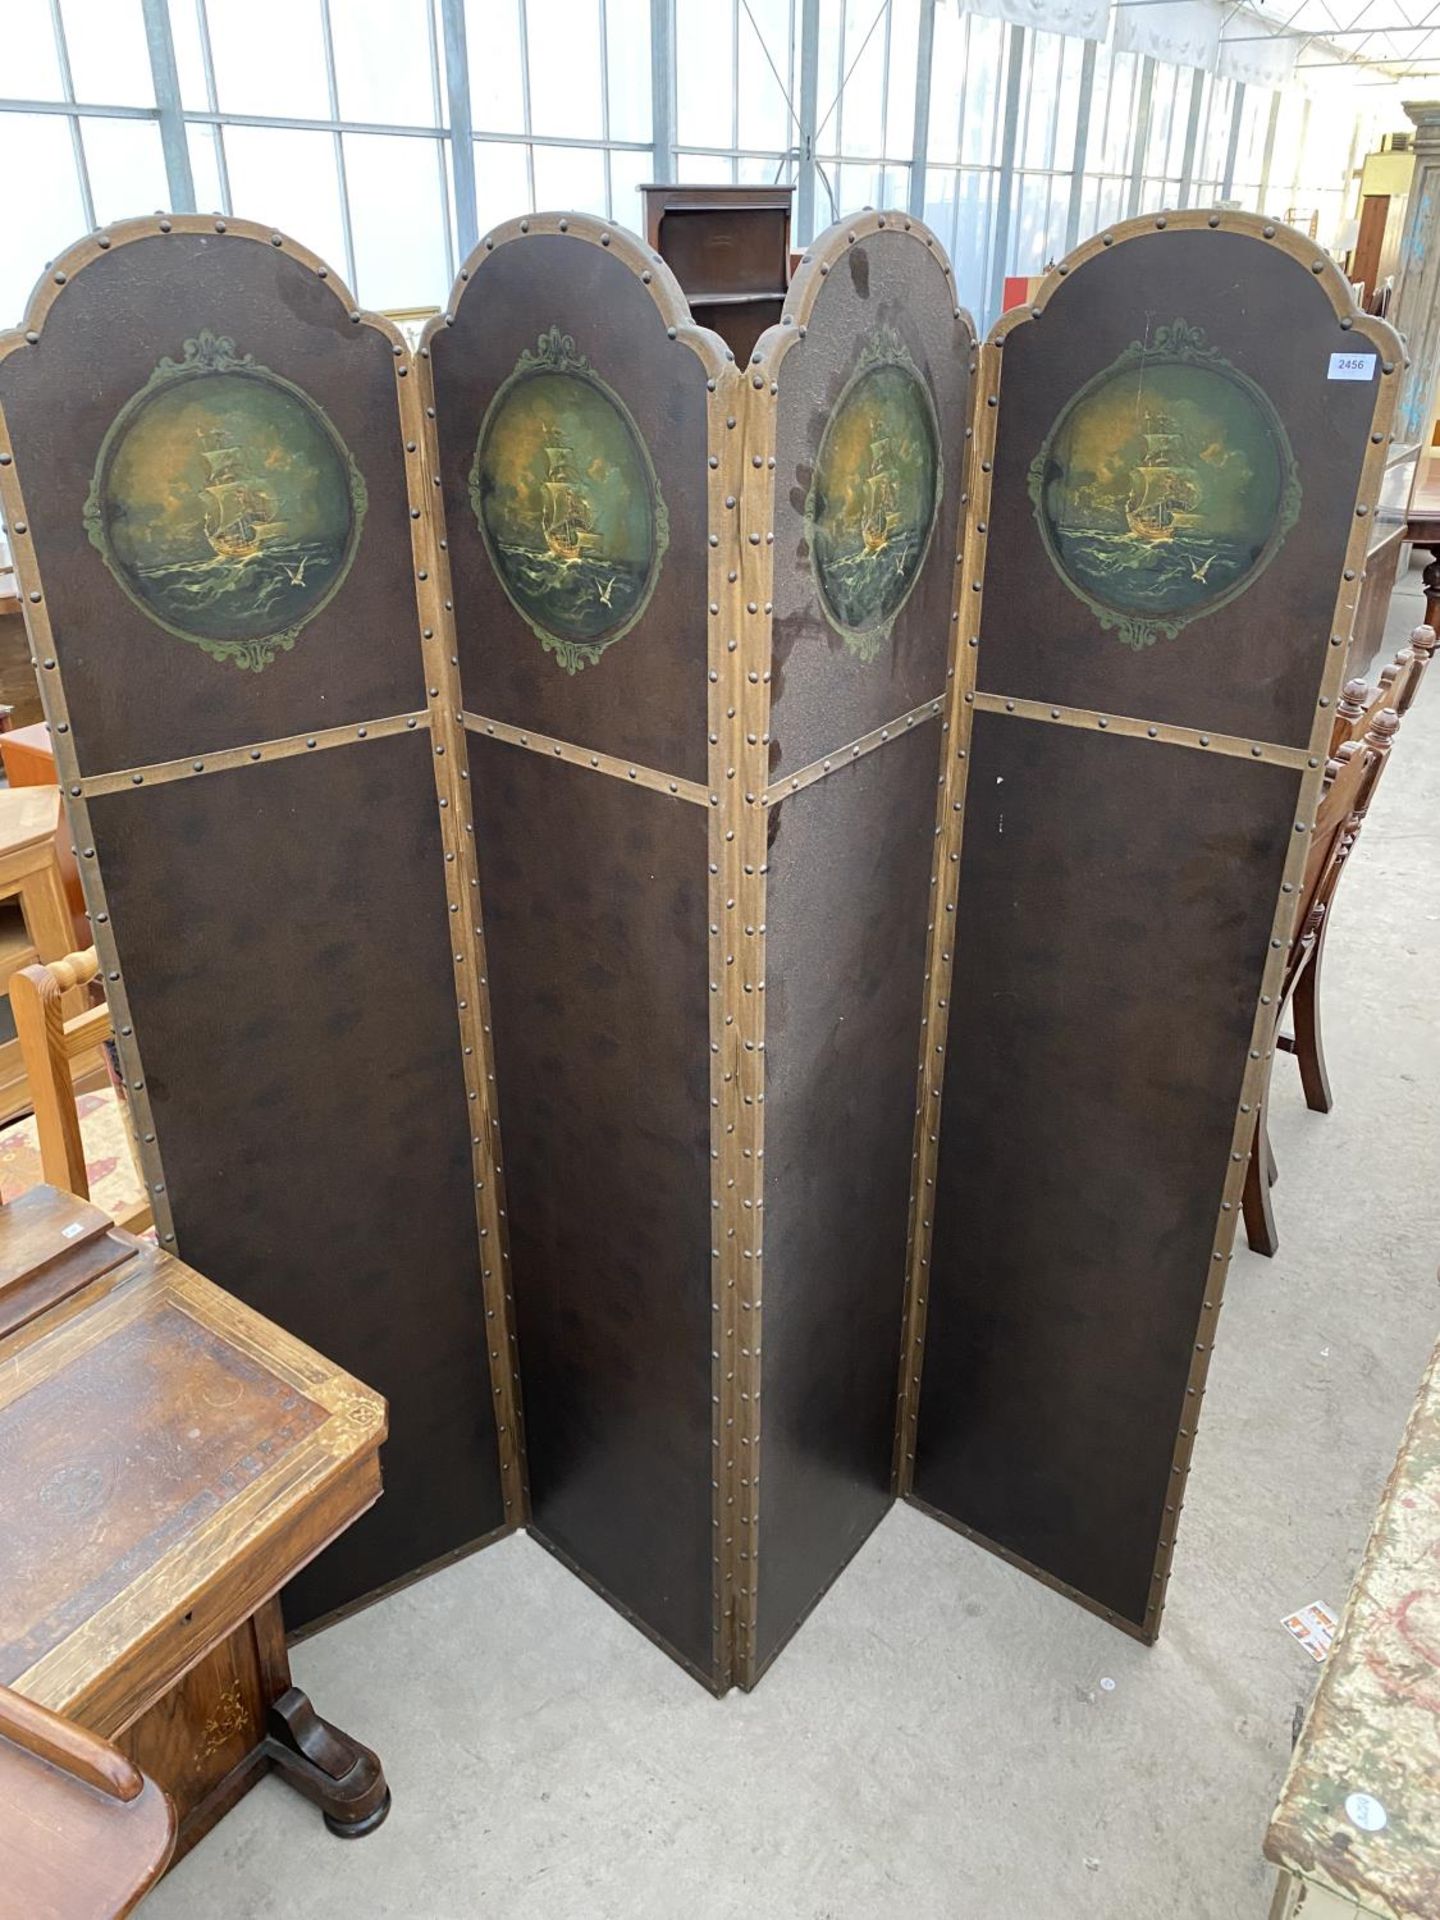 AN EDWARDIAN FOUR DIVISION STUDDED LEATHERETTE SCREEN WITH ARCHED TOPS HAVING PAINTED MASTED SHIP